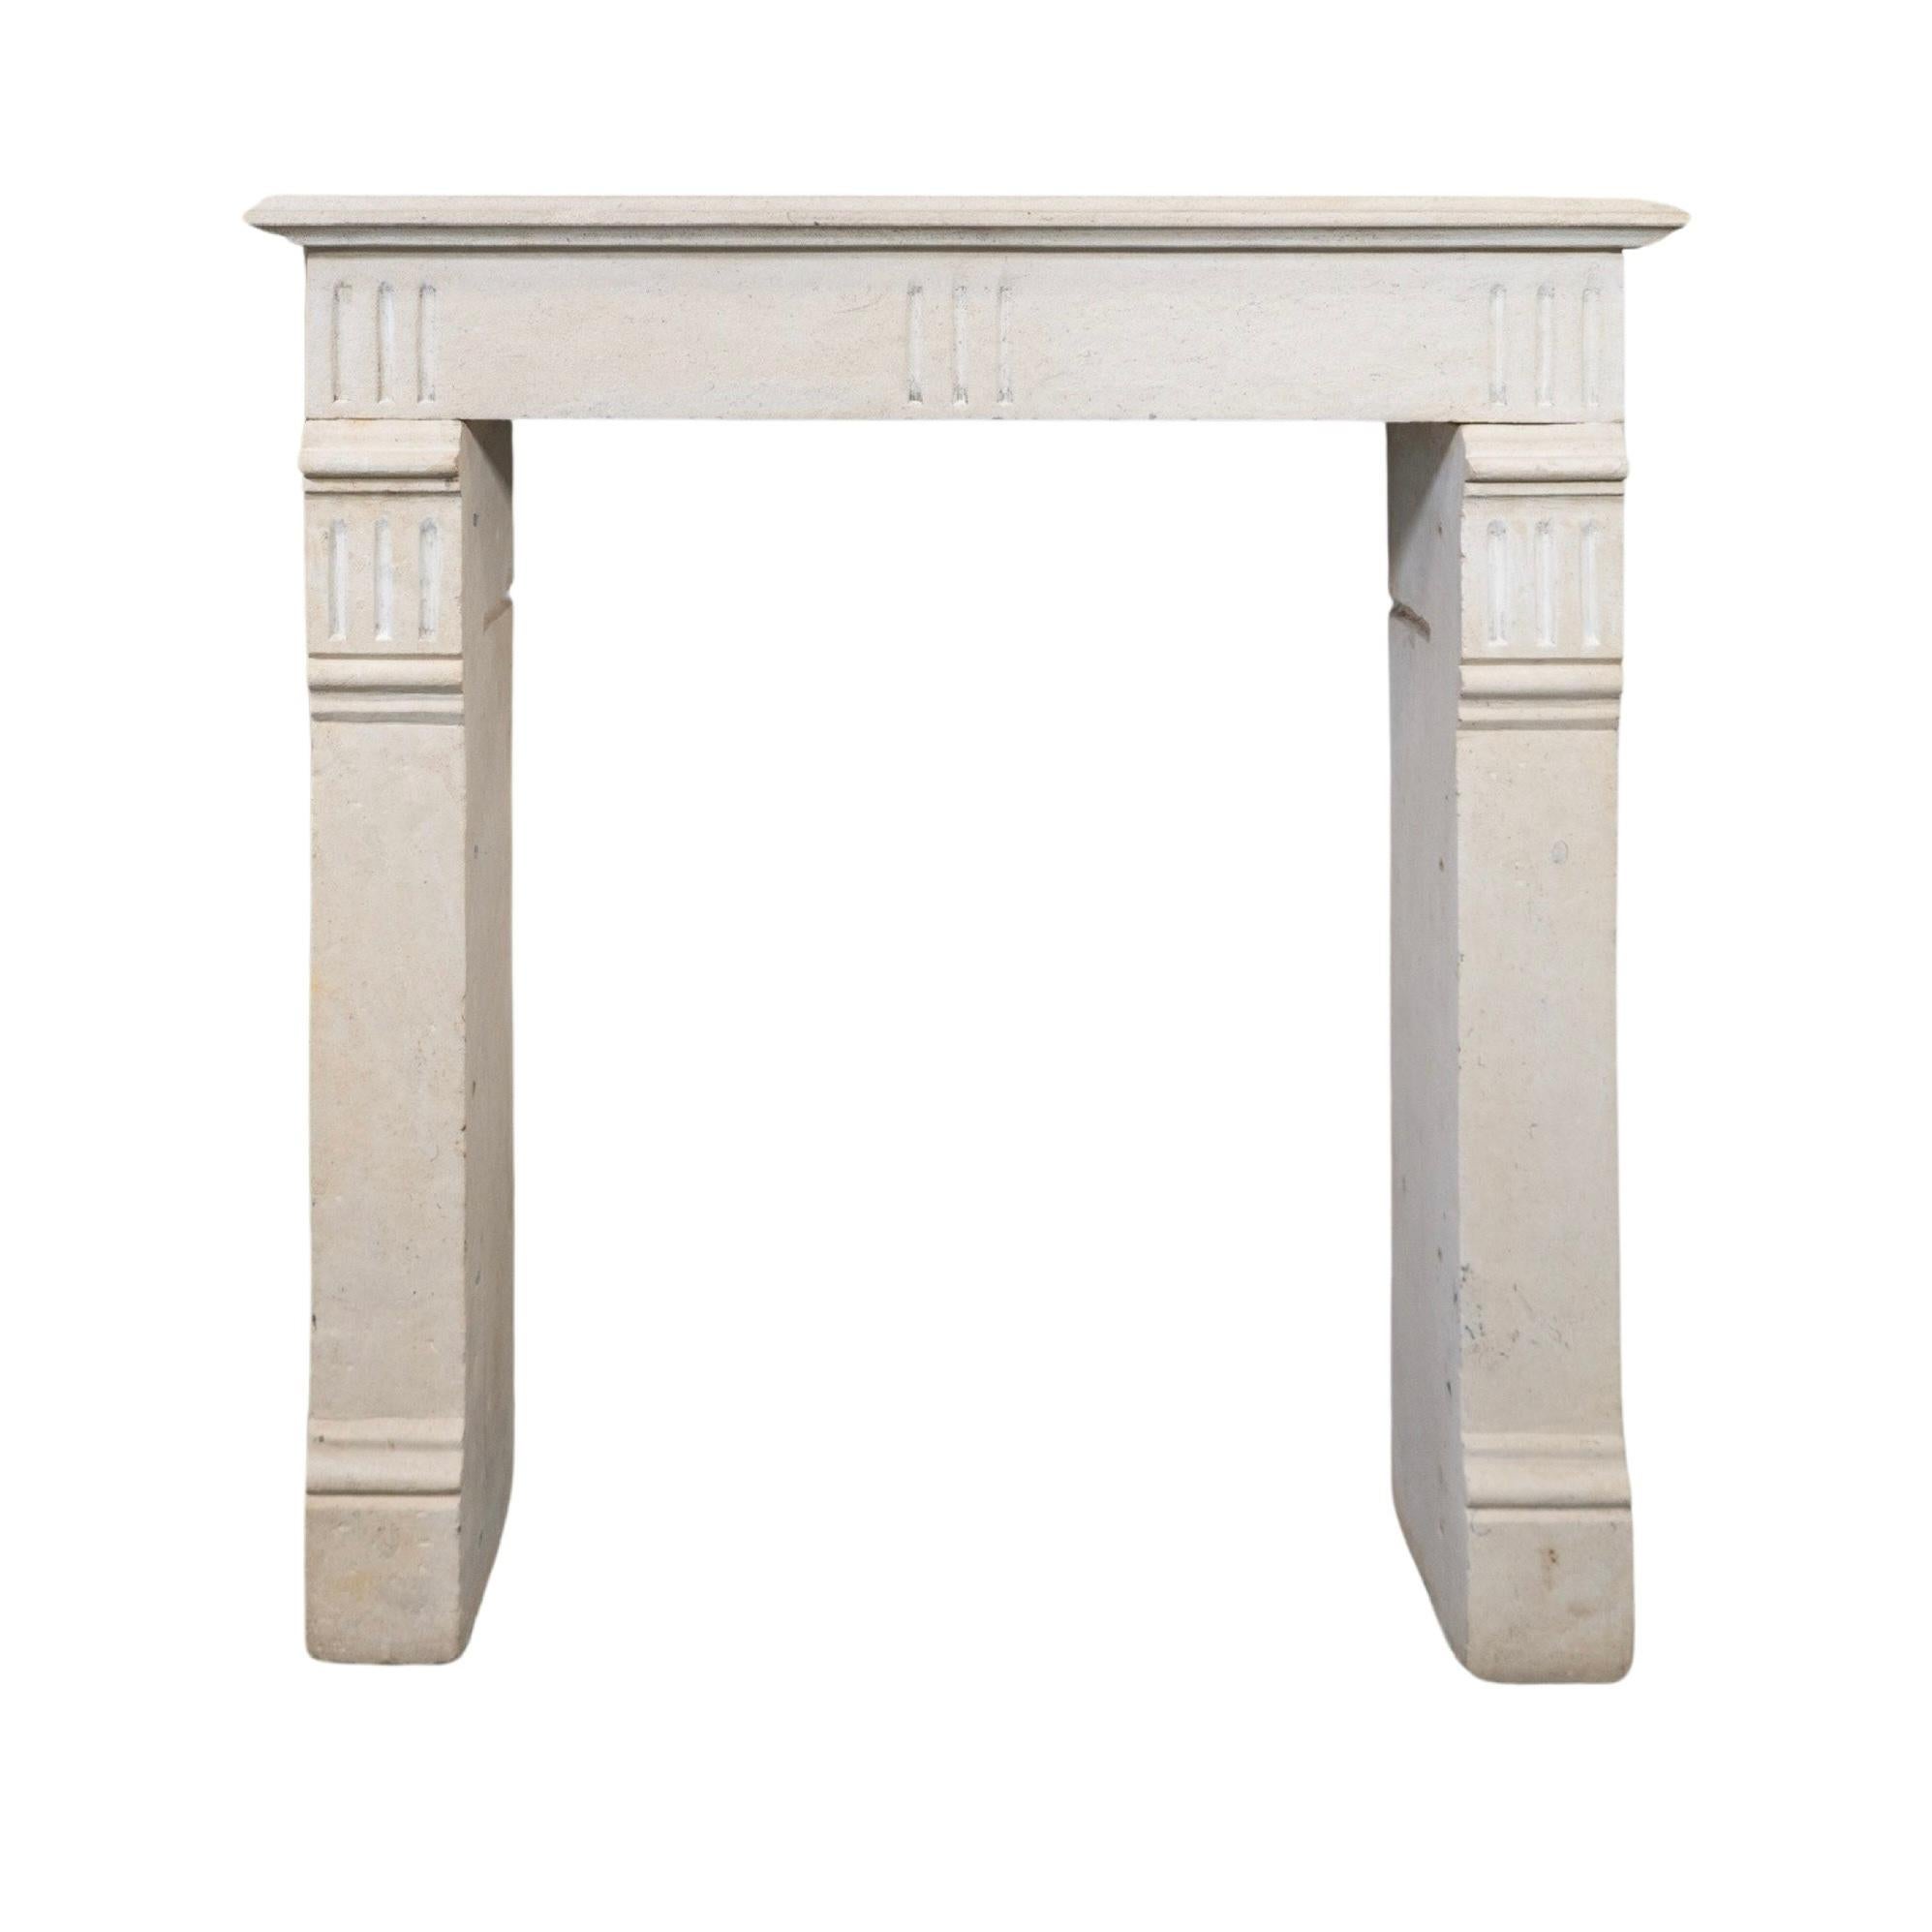 Crafted from French Limestone, this circa 1850 mantel exudes timelessness and elegance. Its petite size adds a subtle touch of sophistication to any room. Imported from France, this mantel is the perfect addition to your home.